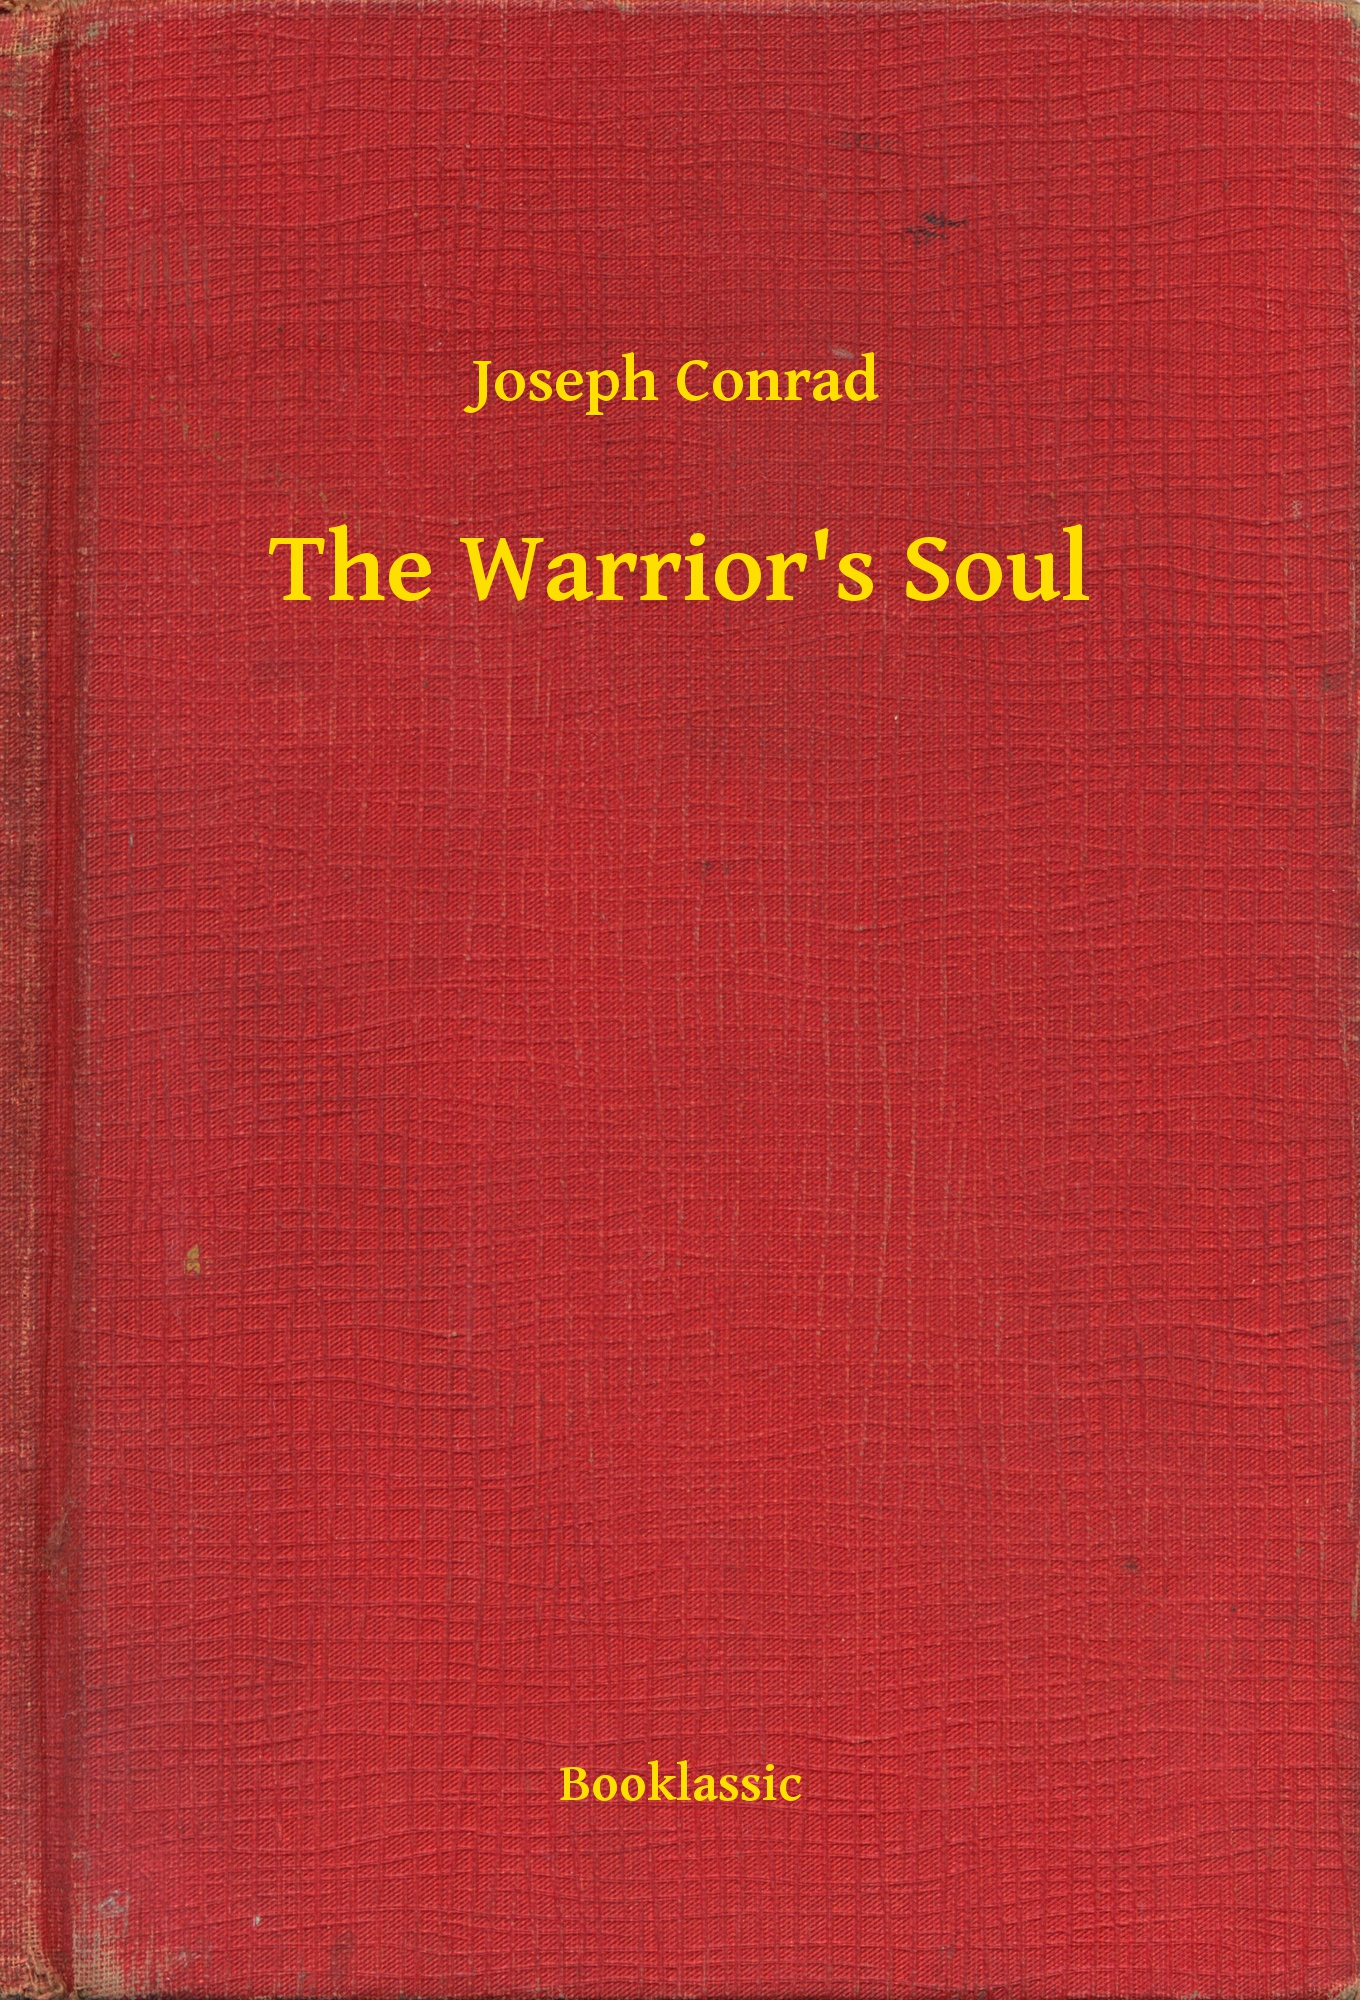 The Warrior"s Soul